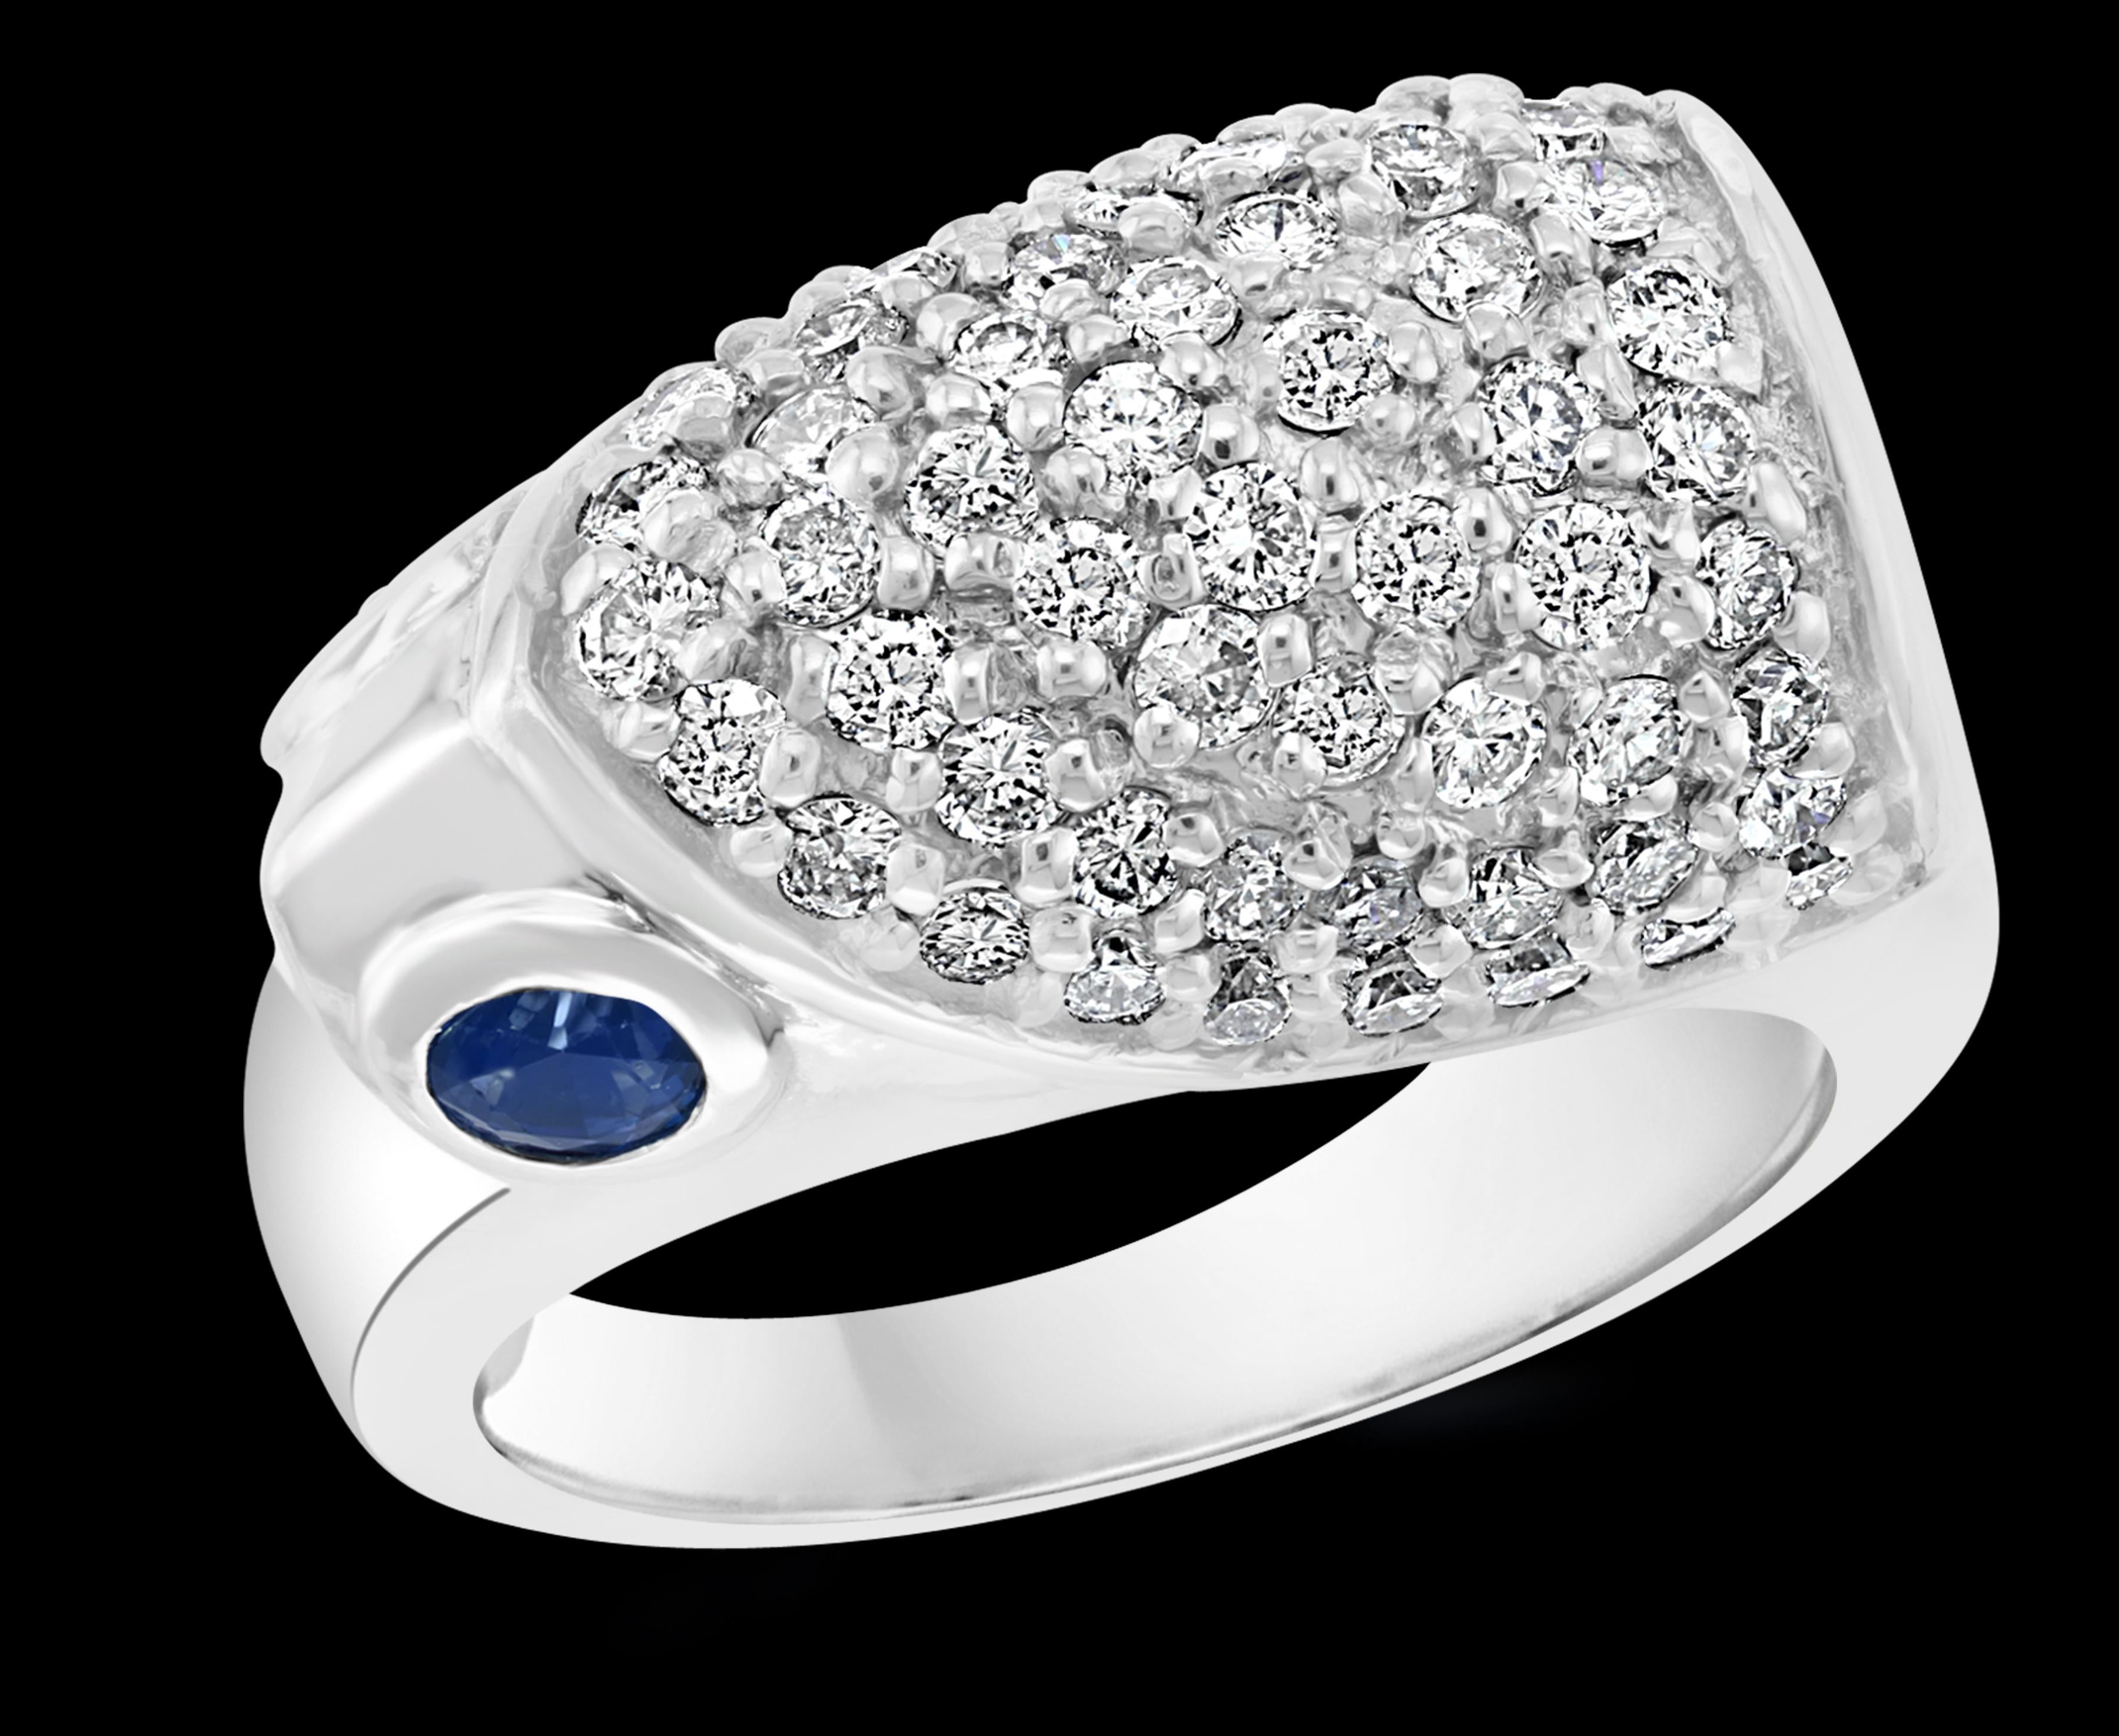 Approximately  1.25 Ct Diamond Animal Cocktail Ring With Sapphire Eyes  In 14 Karat White Gold 

Round Brilliant cut diamond 
14 Karat White  Gold  12.4 Grams
Ring Size 6.5 ( it can be resized to any size for free of charge)
Total Diamond Weight of 